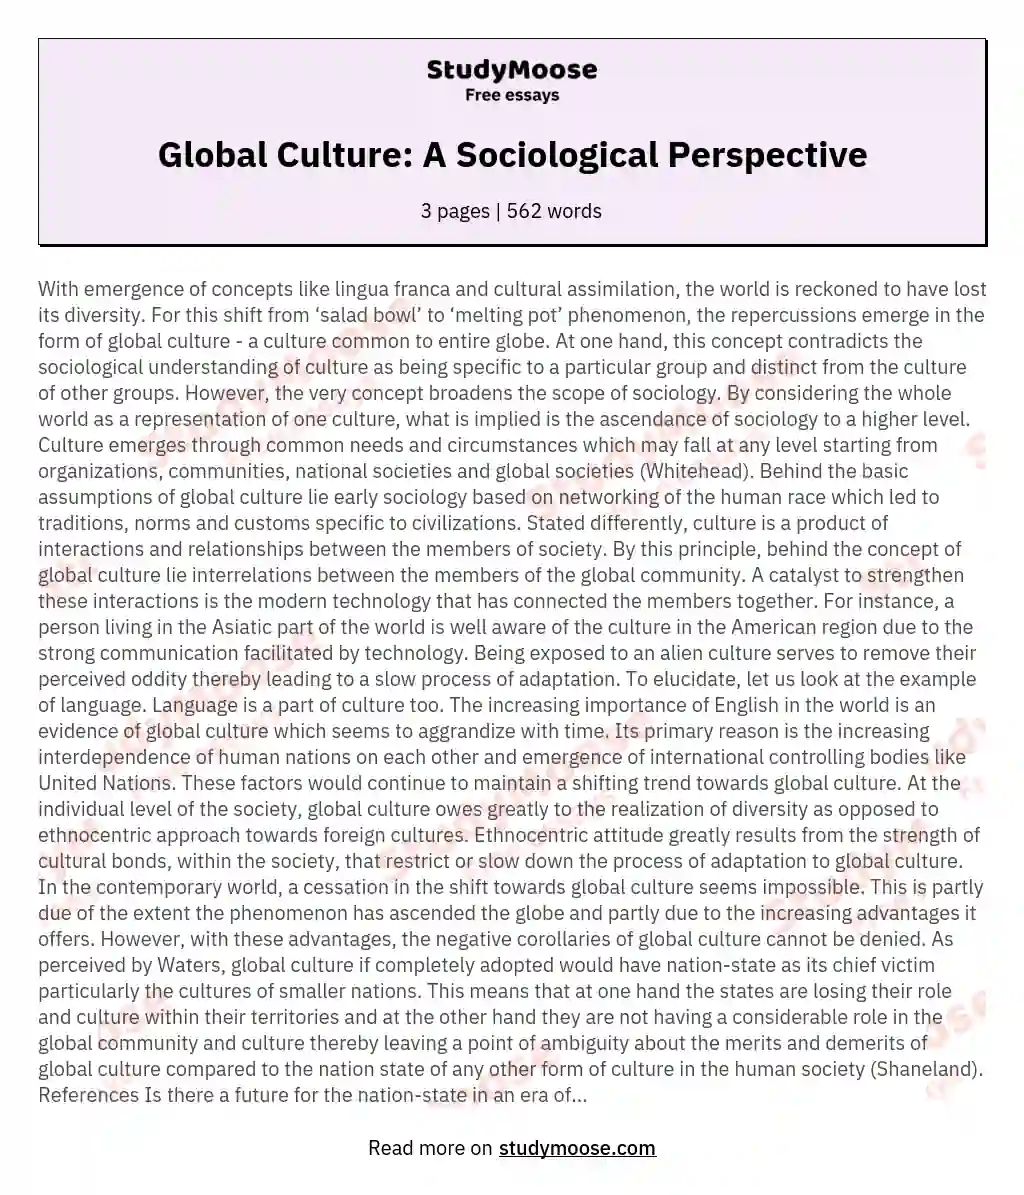 Global Culture: A Sociological Perspective essay